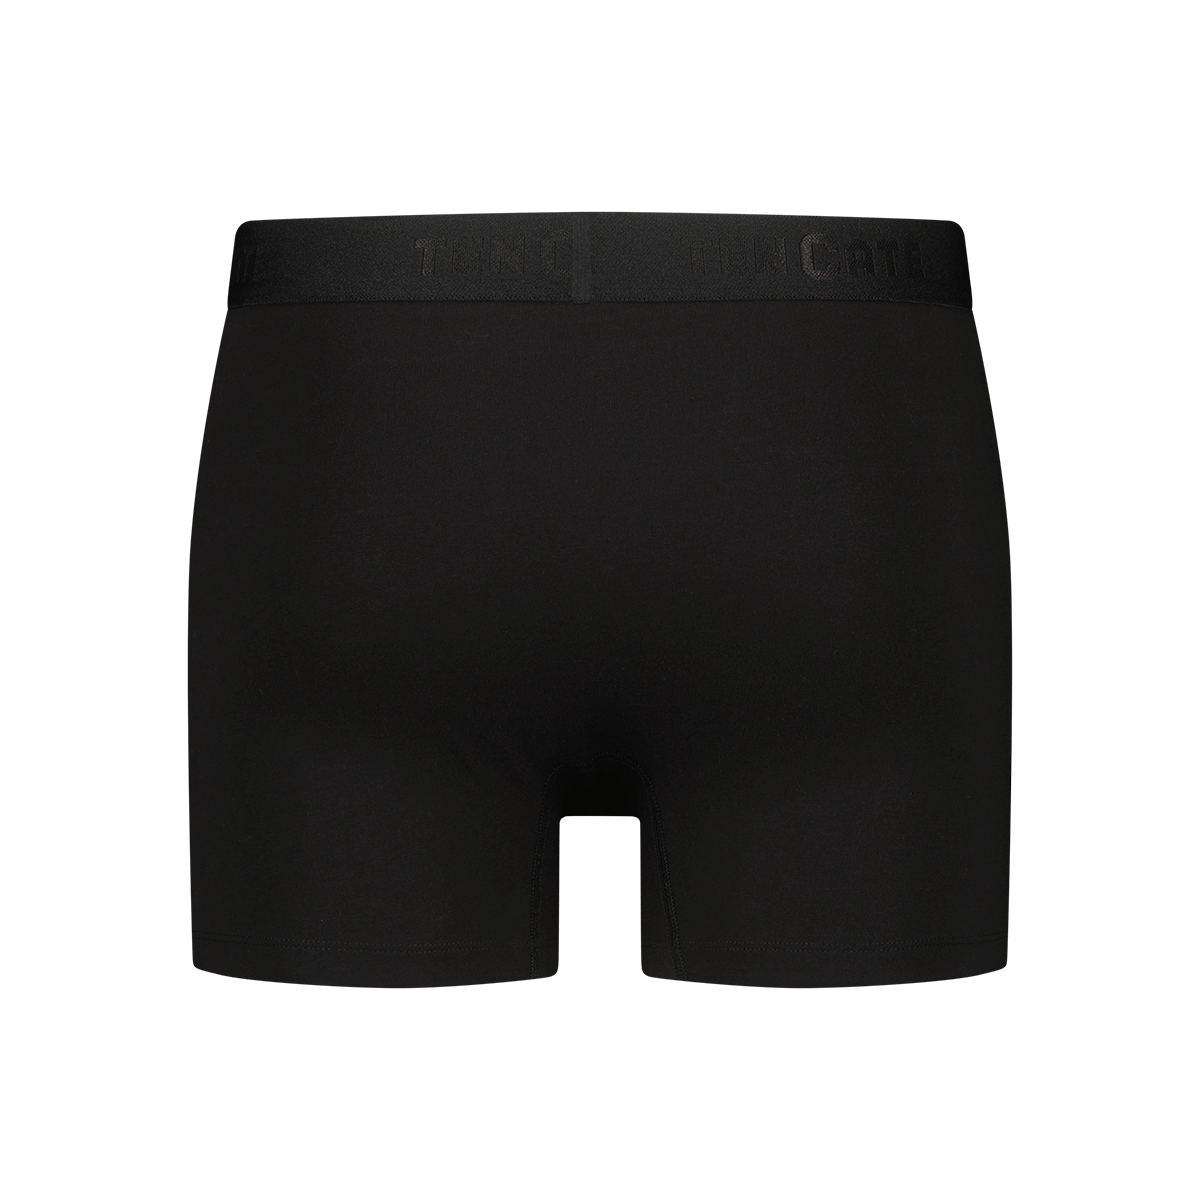 shorts leafs 2 pack